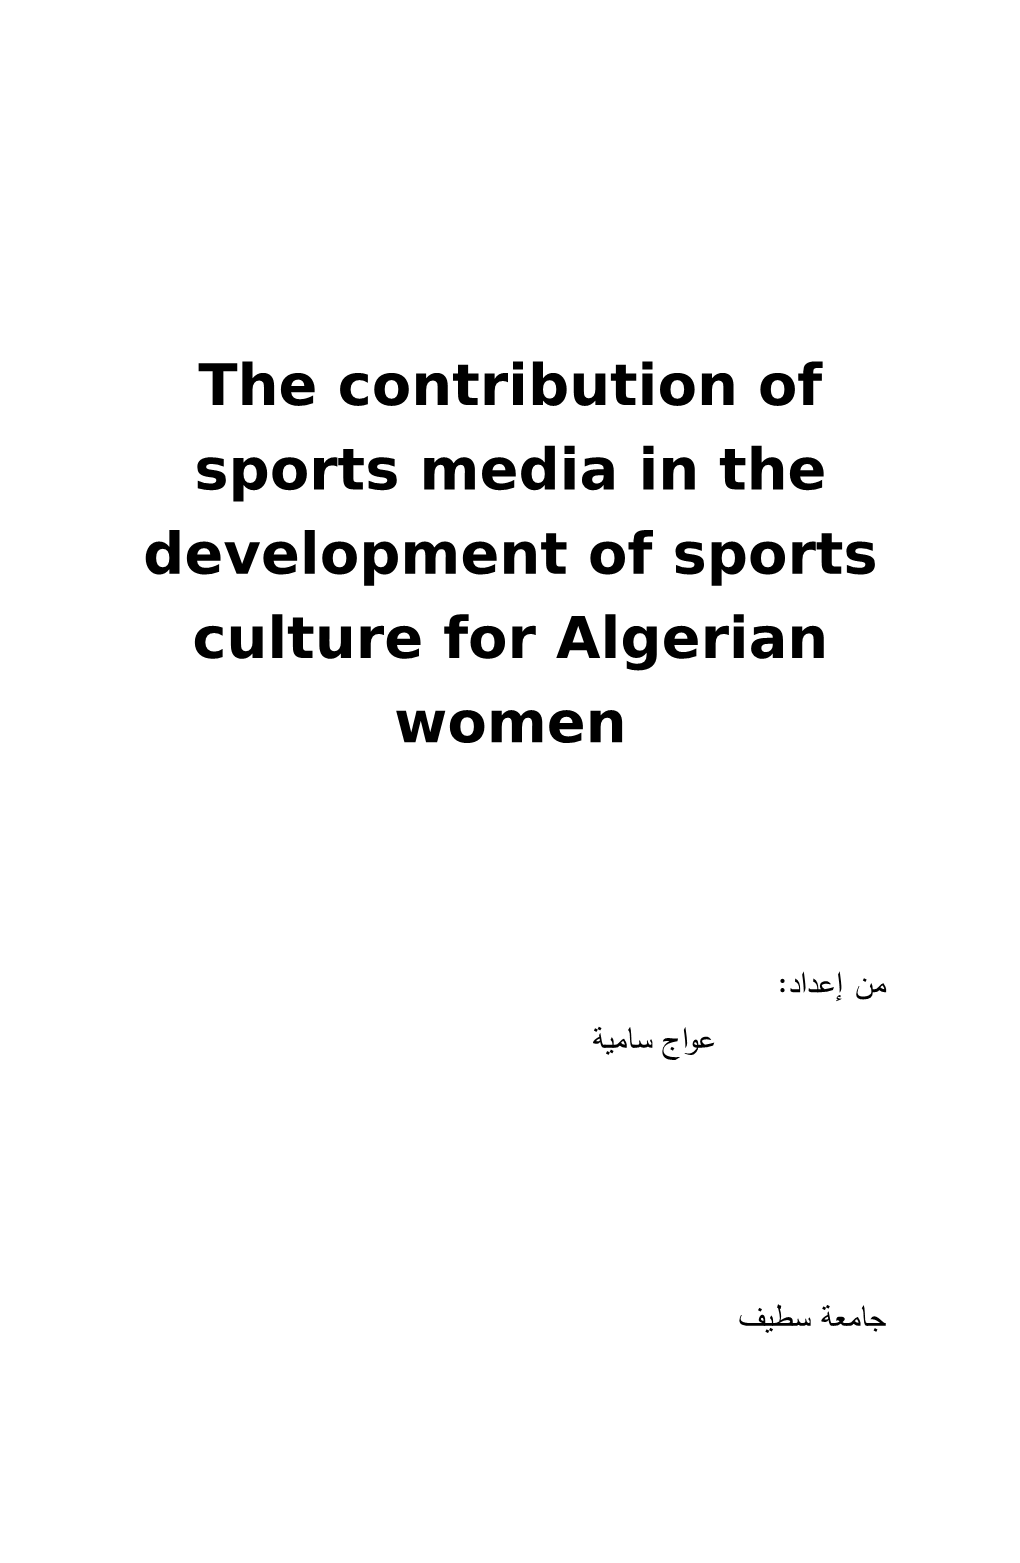 The Contribution of Sports Media in the Development of Sports Culture for Algerian